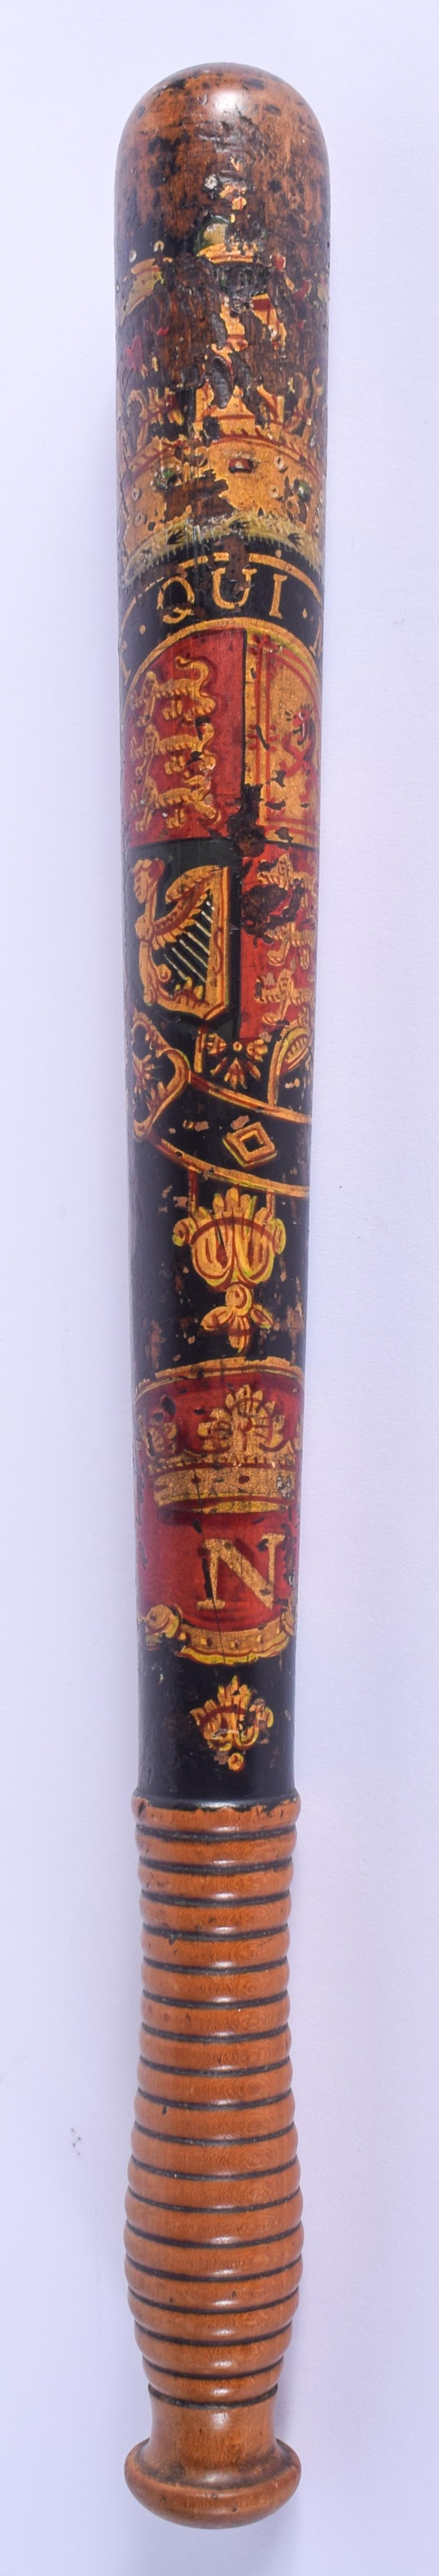 A WILLIAM IV PAINTED WOOD TRUNCHEON. 42 cm long.